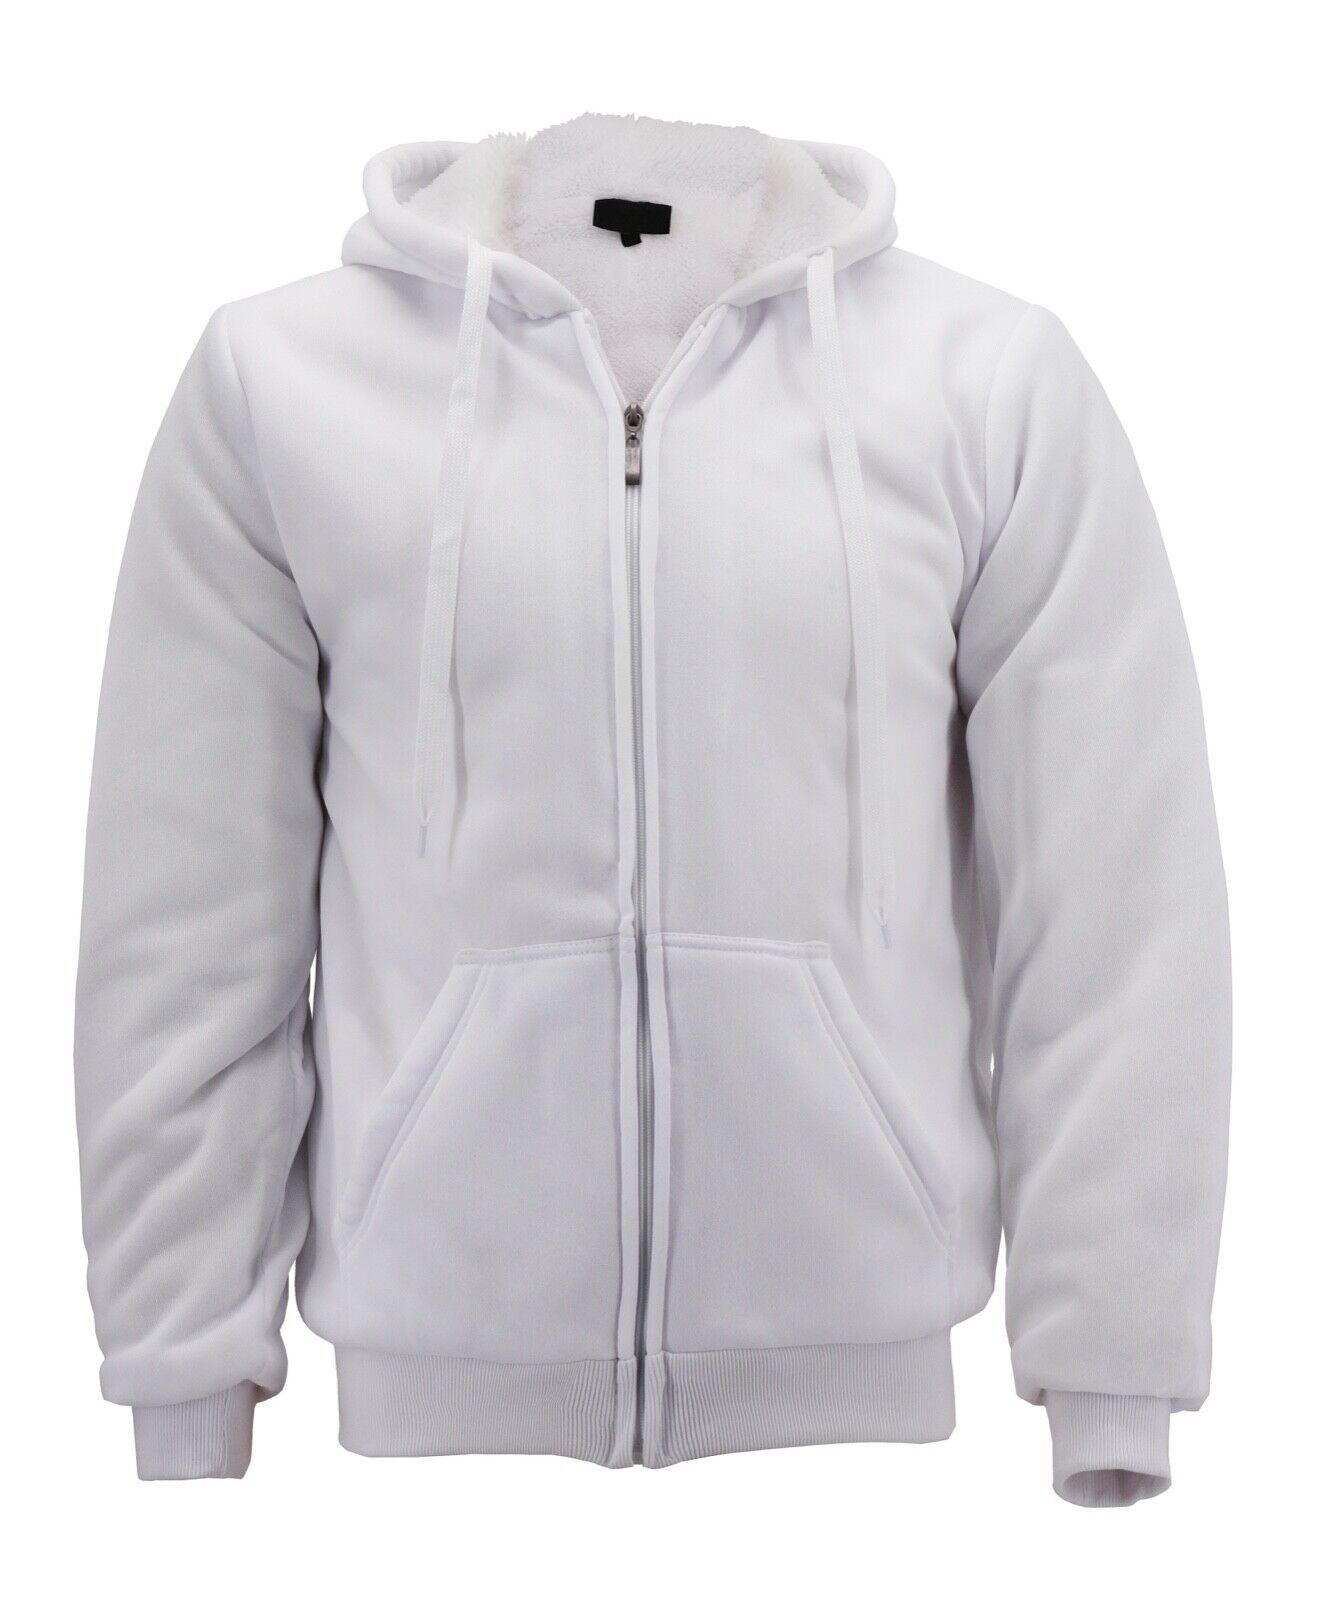 Primary image for Men's White Athletic Soft Sherpa Lined Fleece Zip Up Hoodie Sweater Jacket - M